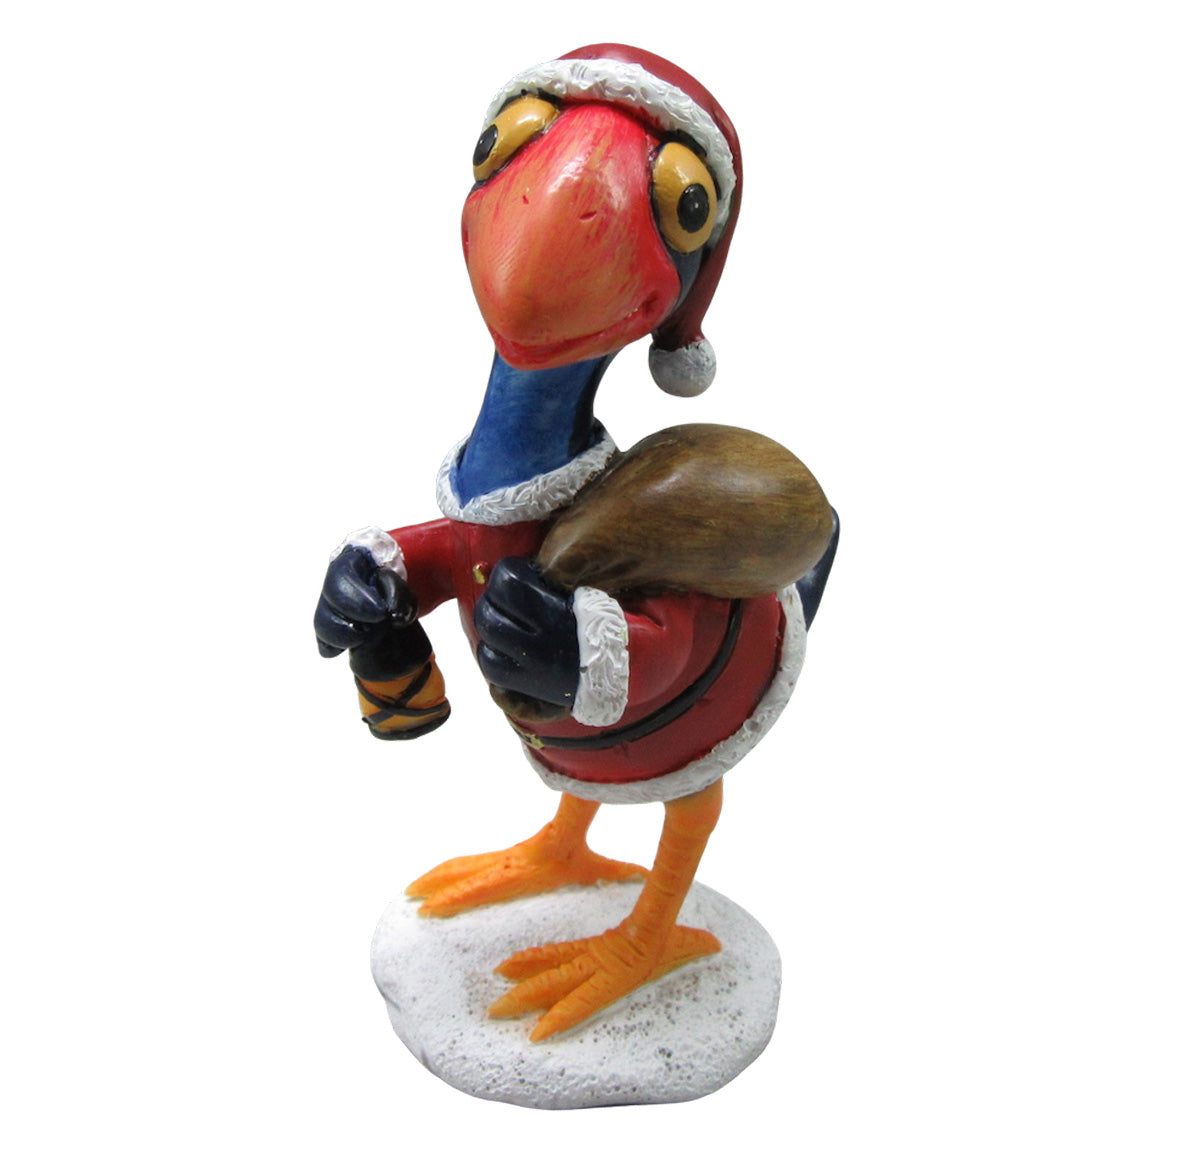 Pukeko Bird In Santa Outfit With Gift Sack | Home Decor